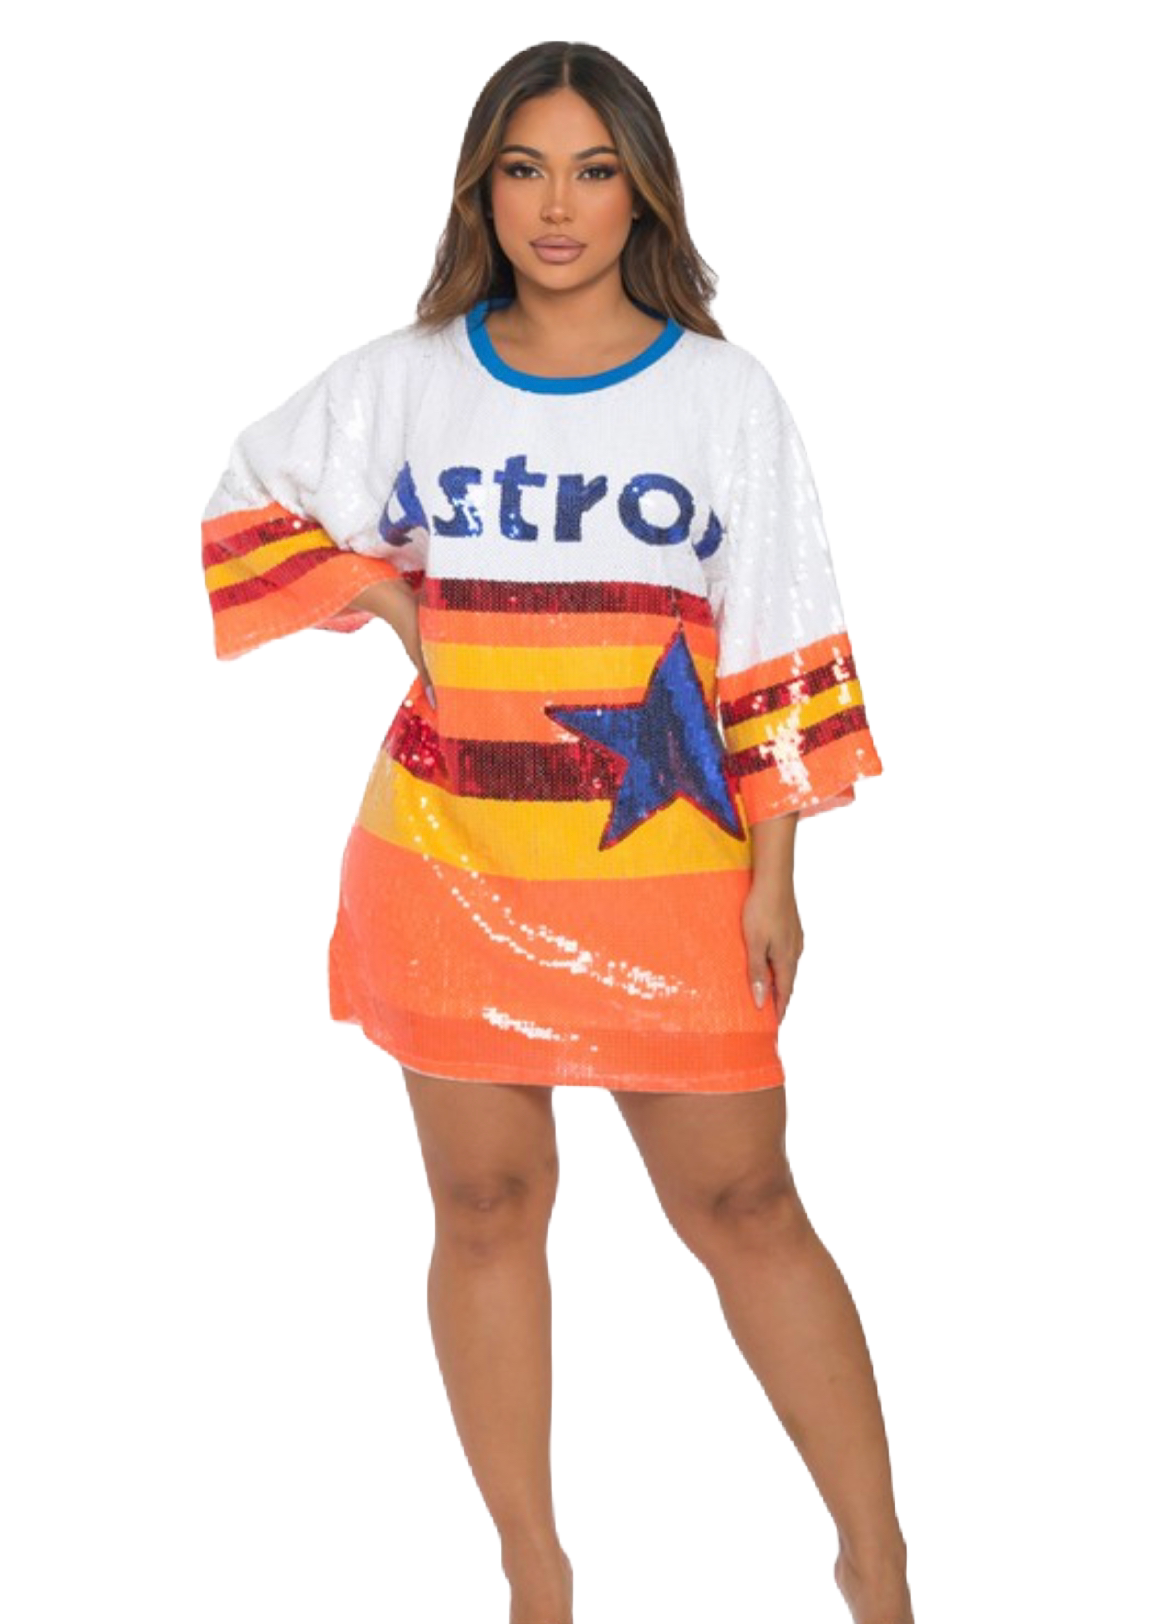 Such a cute Oversize Astros Sequin Top! 🧡🤍💙@overdressstyles on